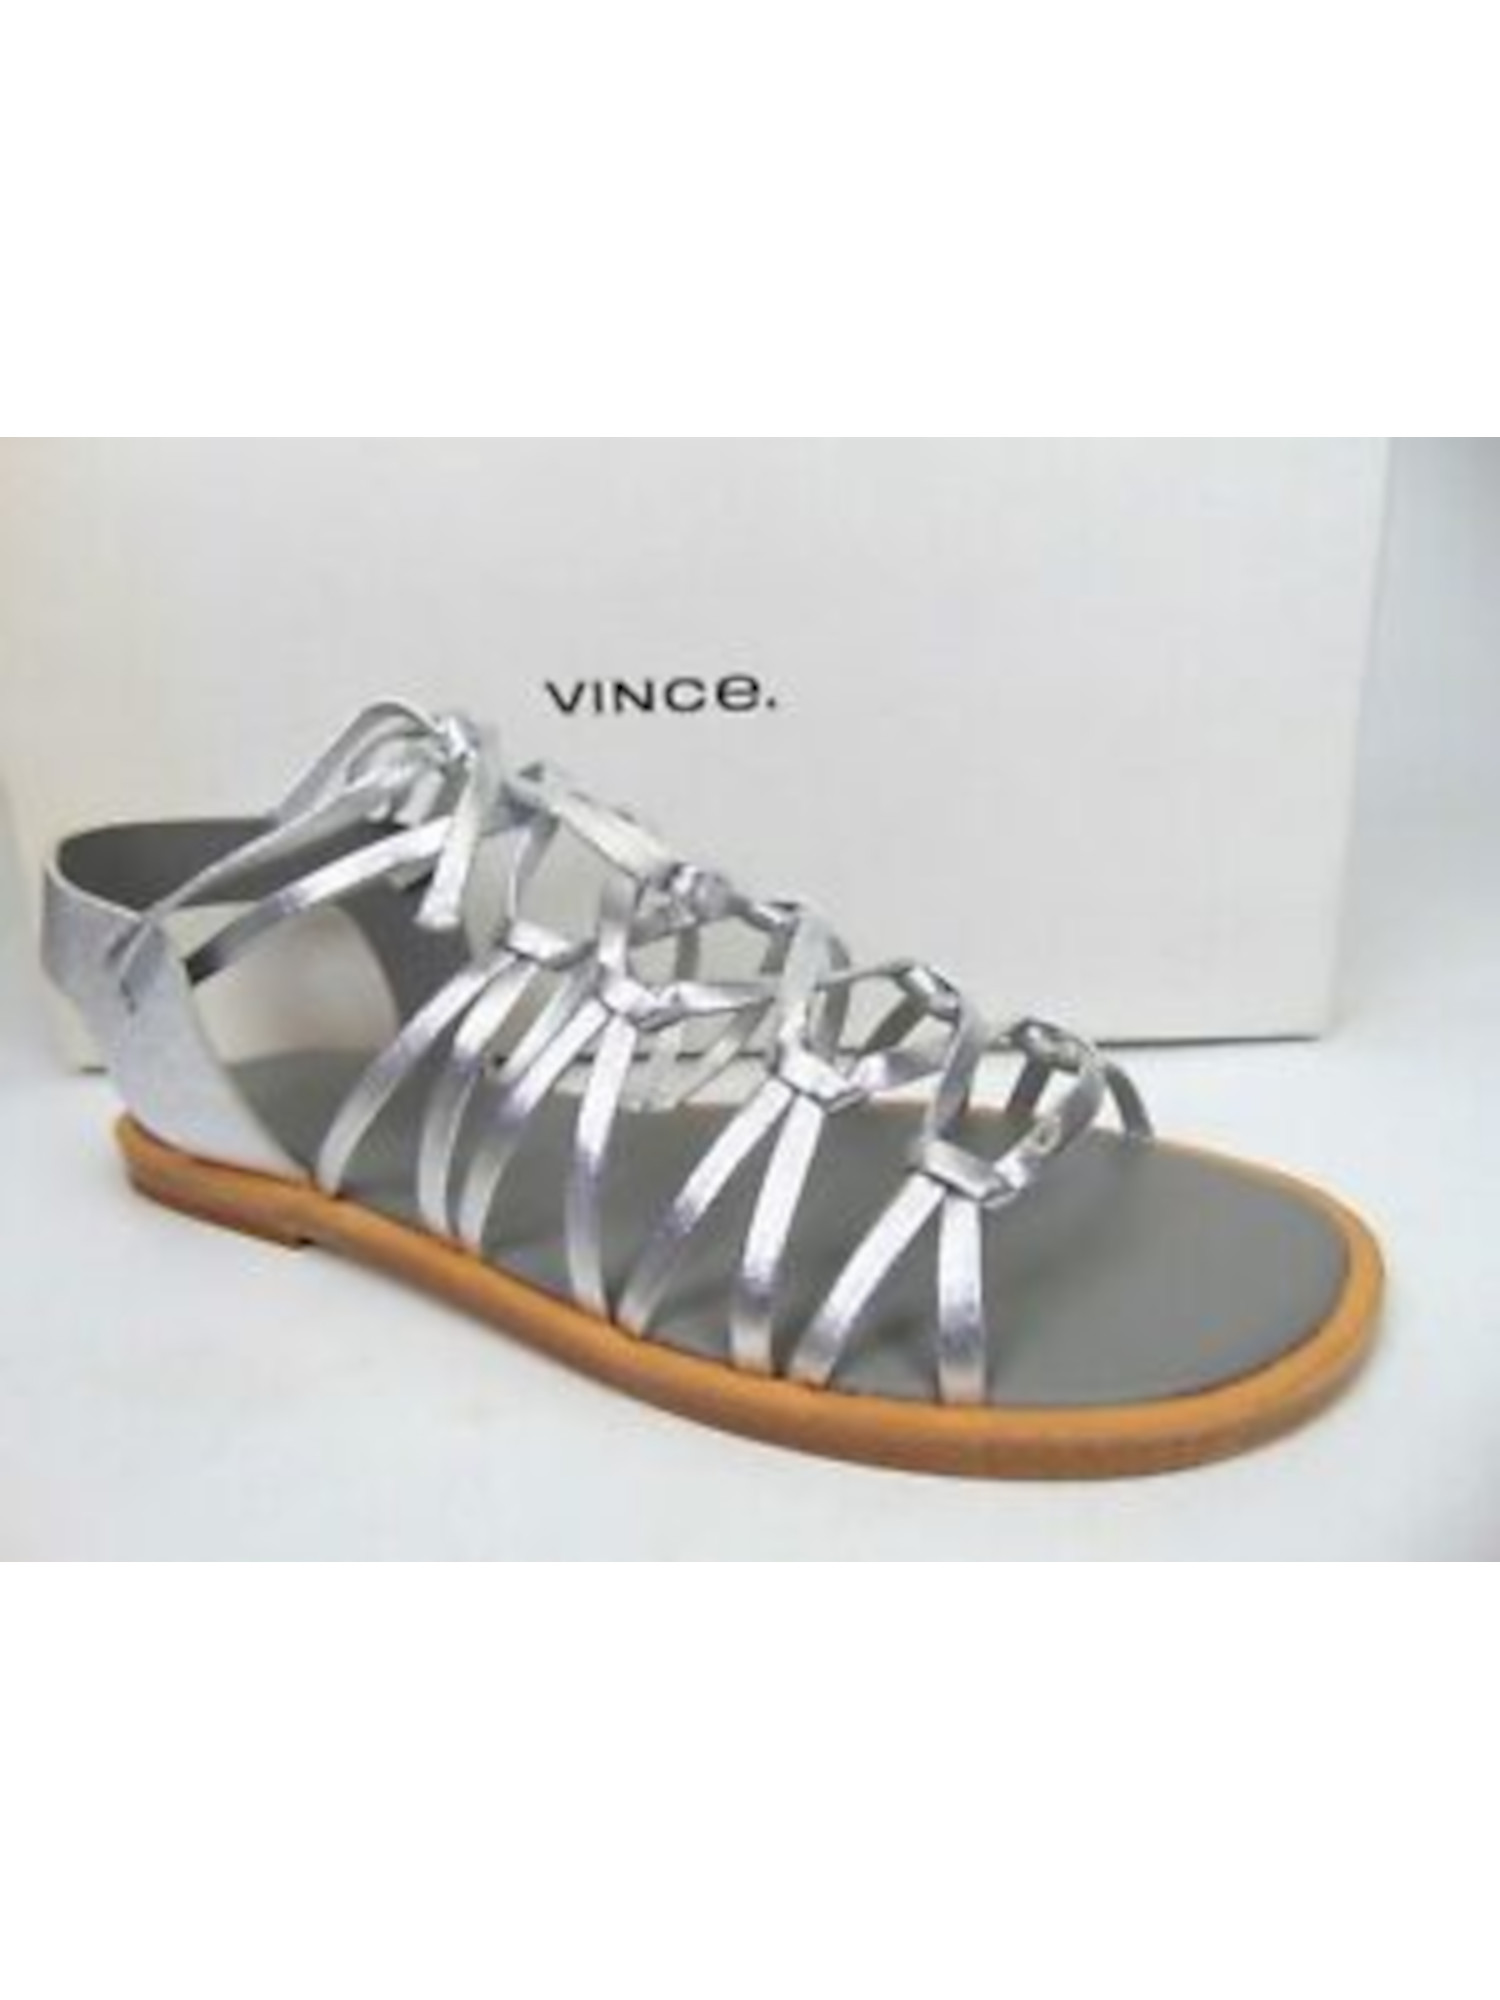 VINCE. Womens Silver Strappy Palmera Round Toe Lace-Up Leather Slingback Sandal 6 M